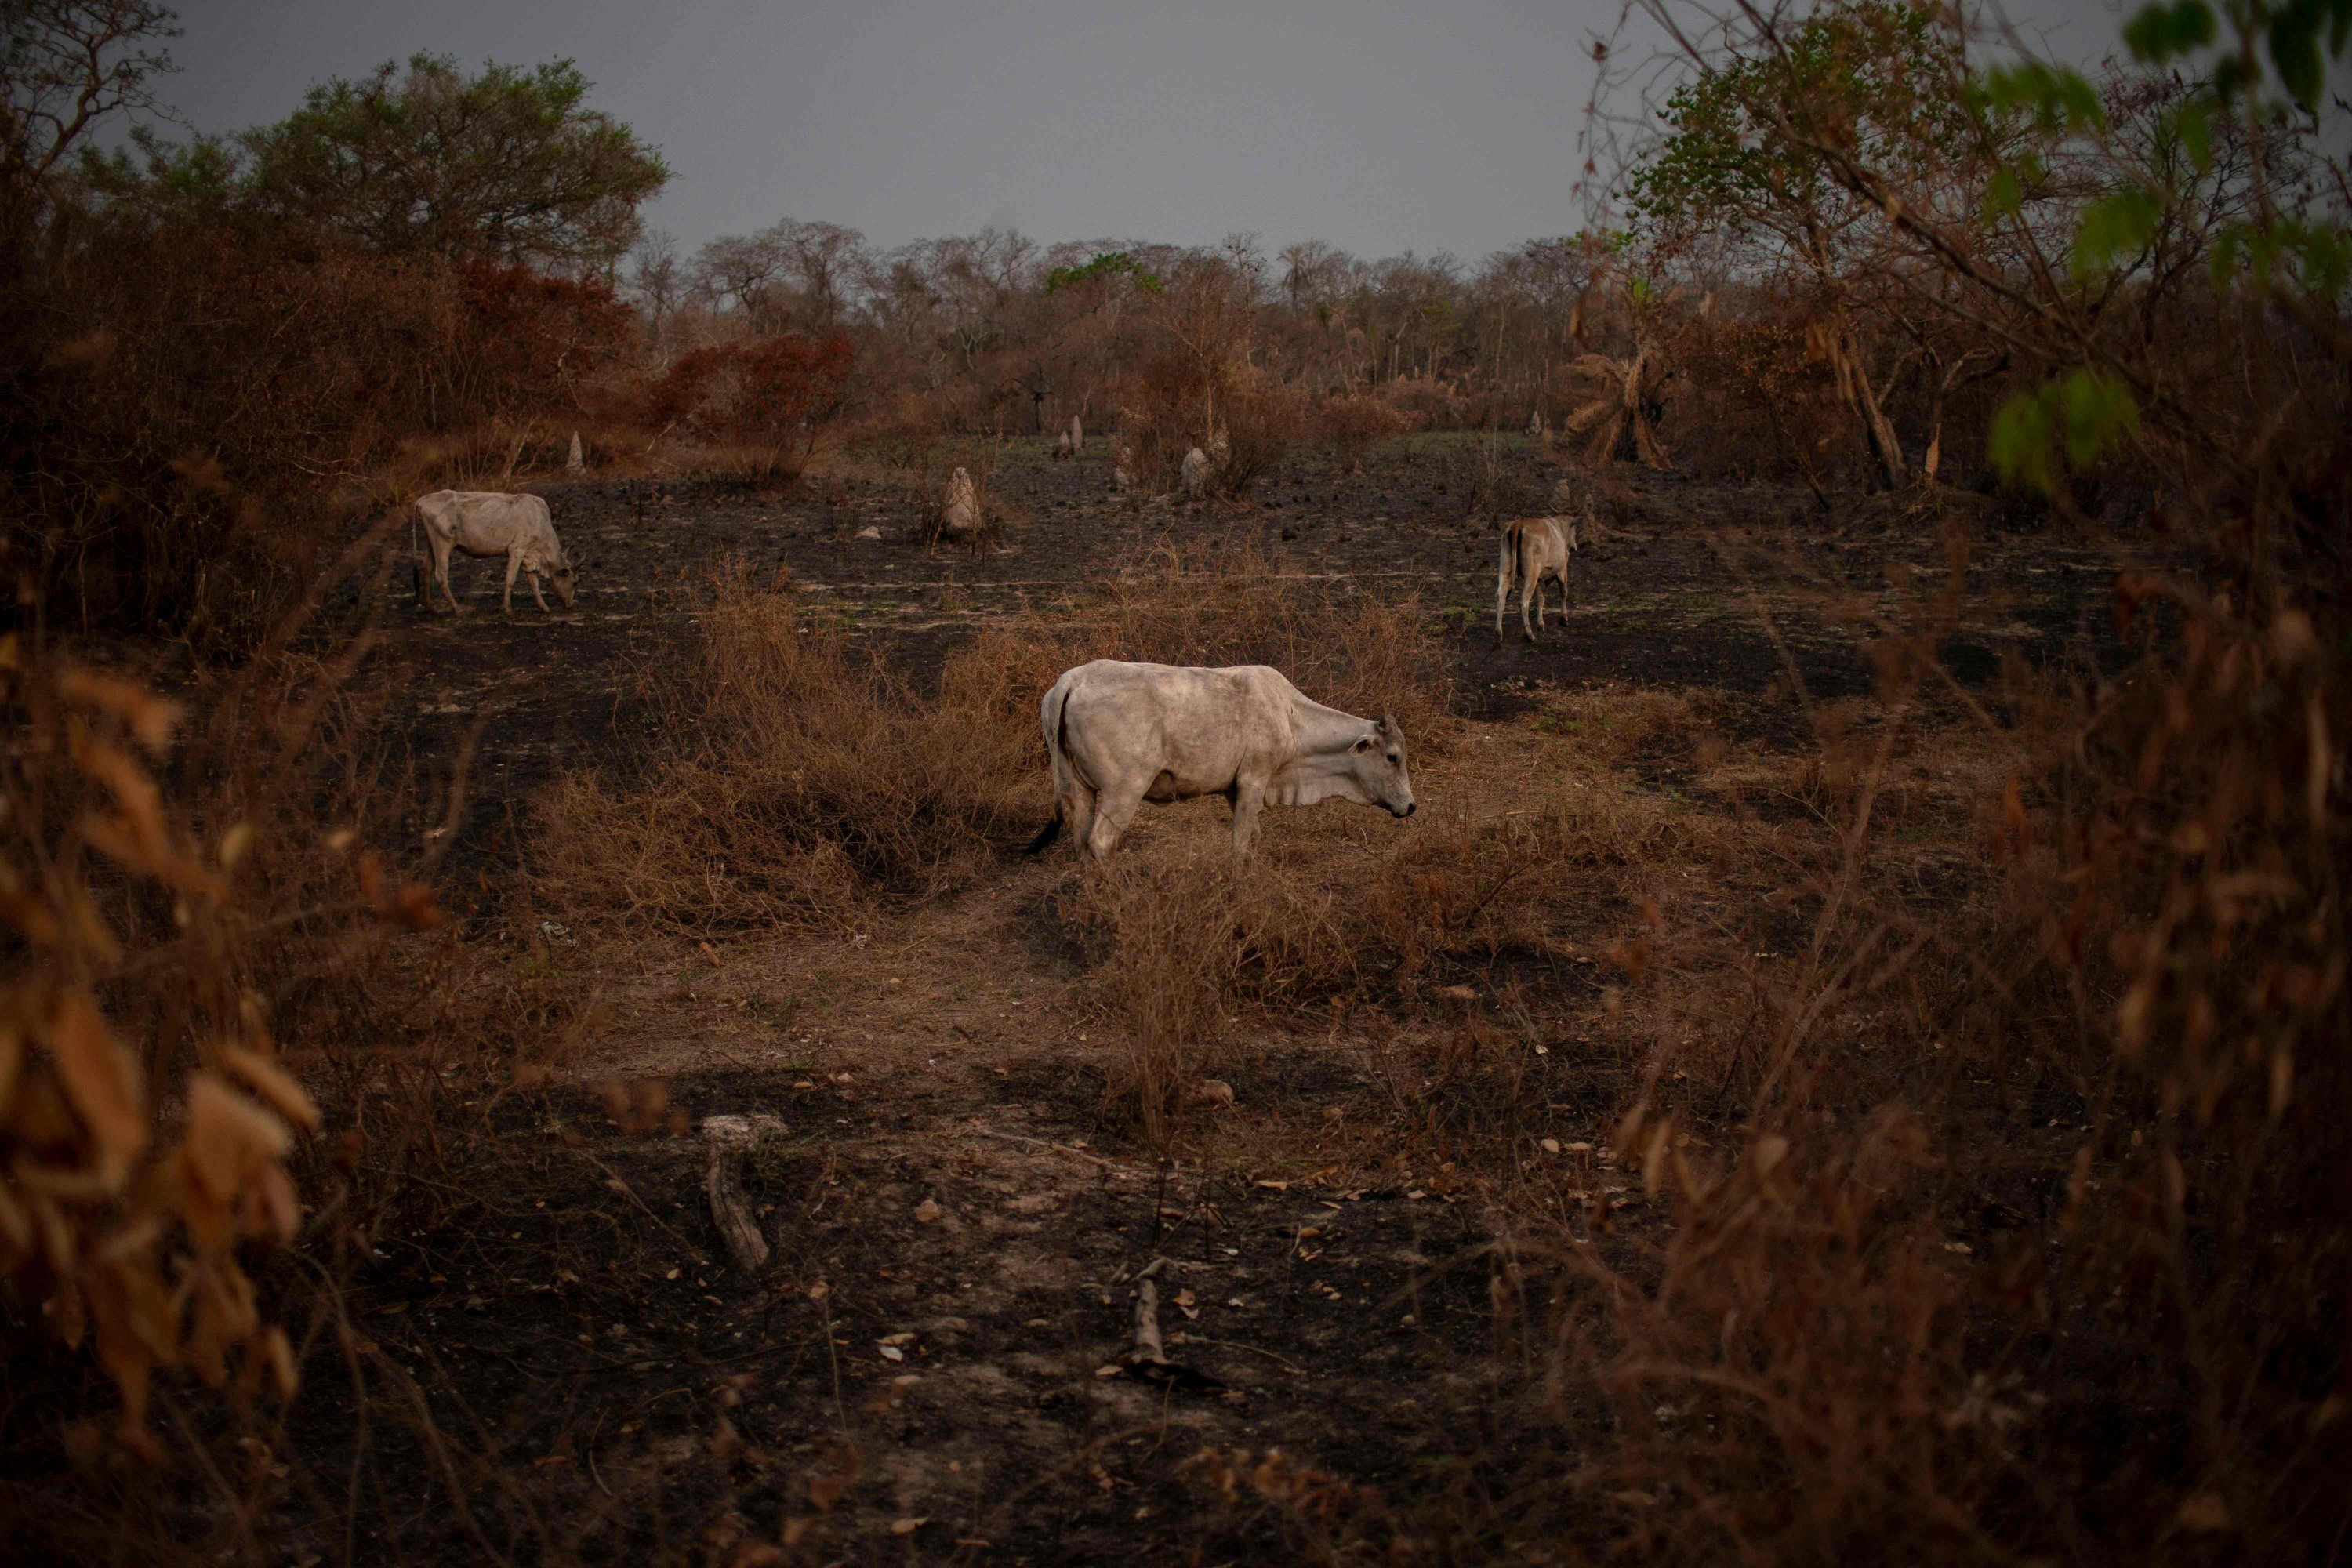 Cattle are seen grazing on a recent burnt area of the wetlands of Pantanal near Transpantaneira park road in Mato Grosso state, Brazil, on Sept. 12, 2020. (AFP Photo)